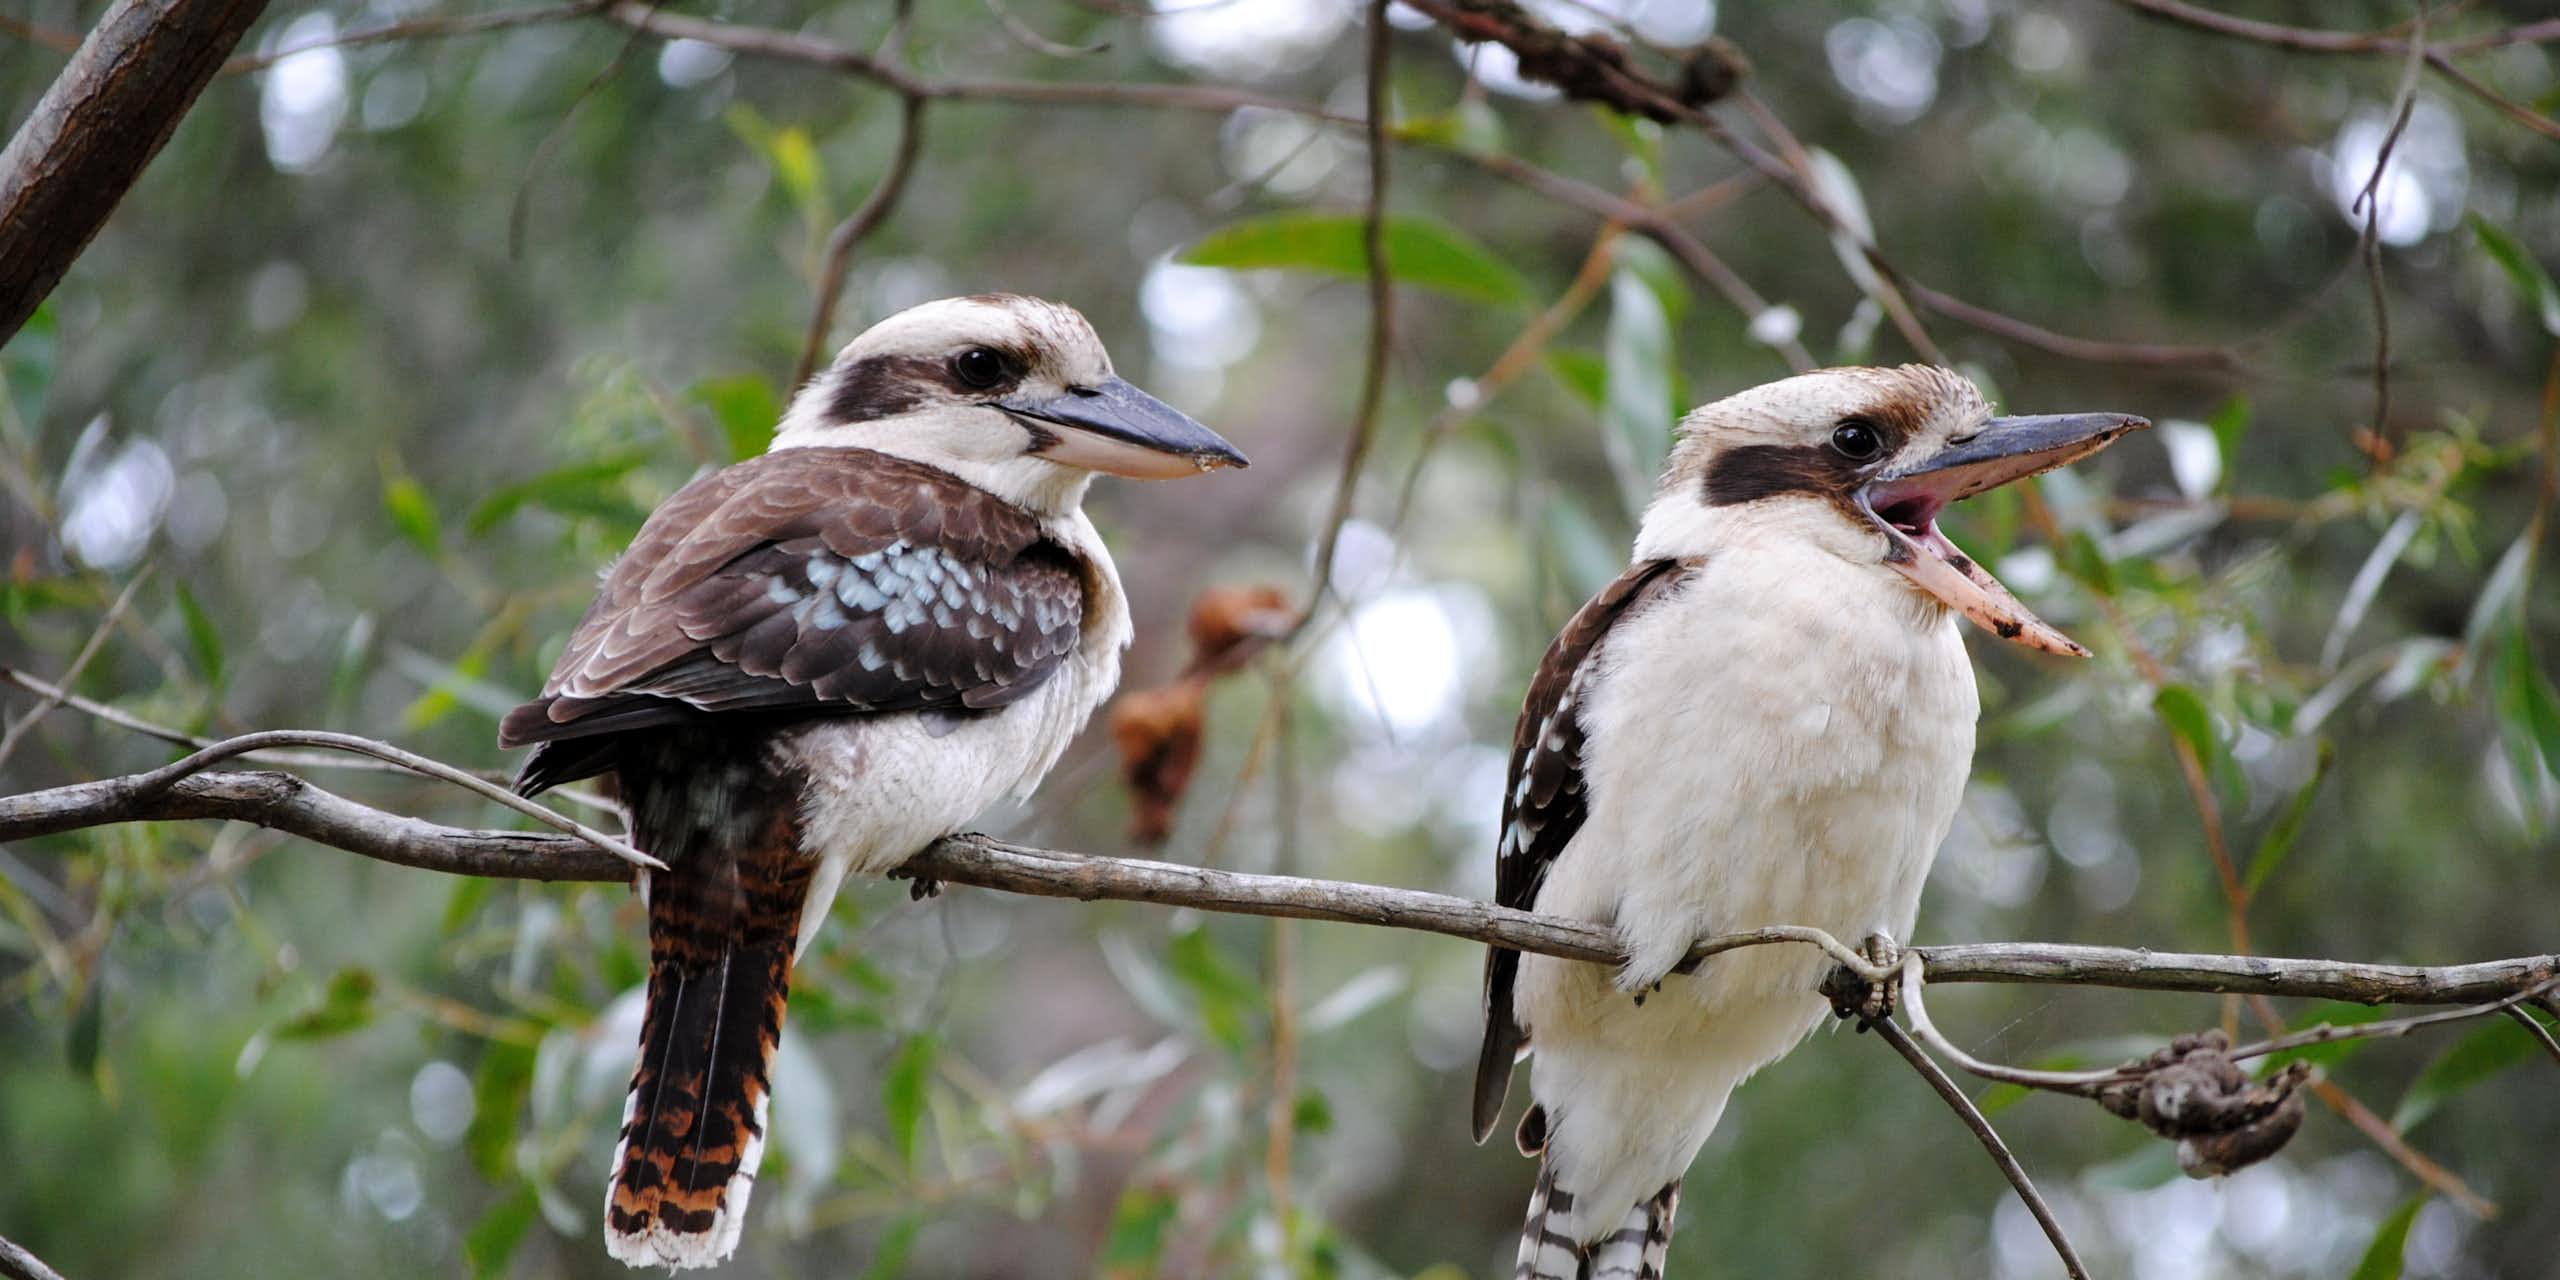 Two laughing kookaburras perched on a tree branch